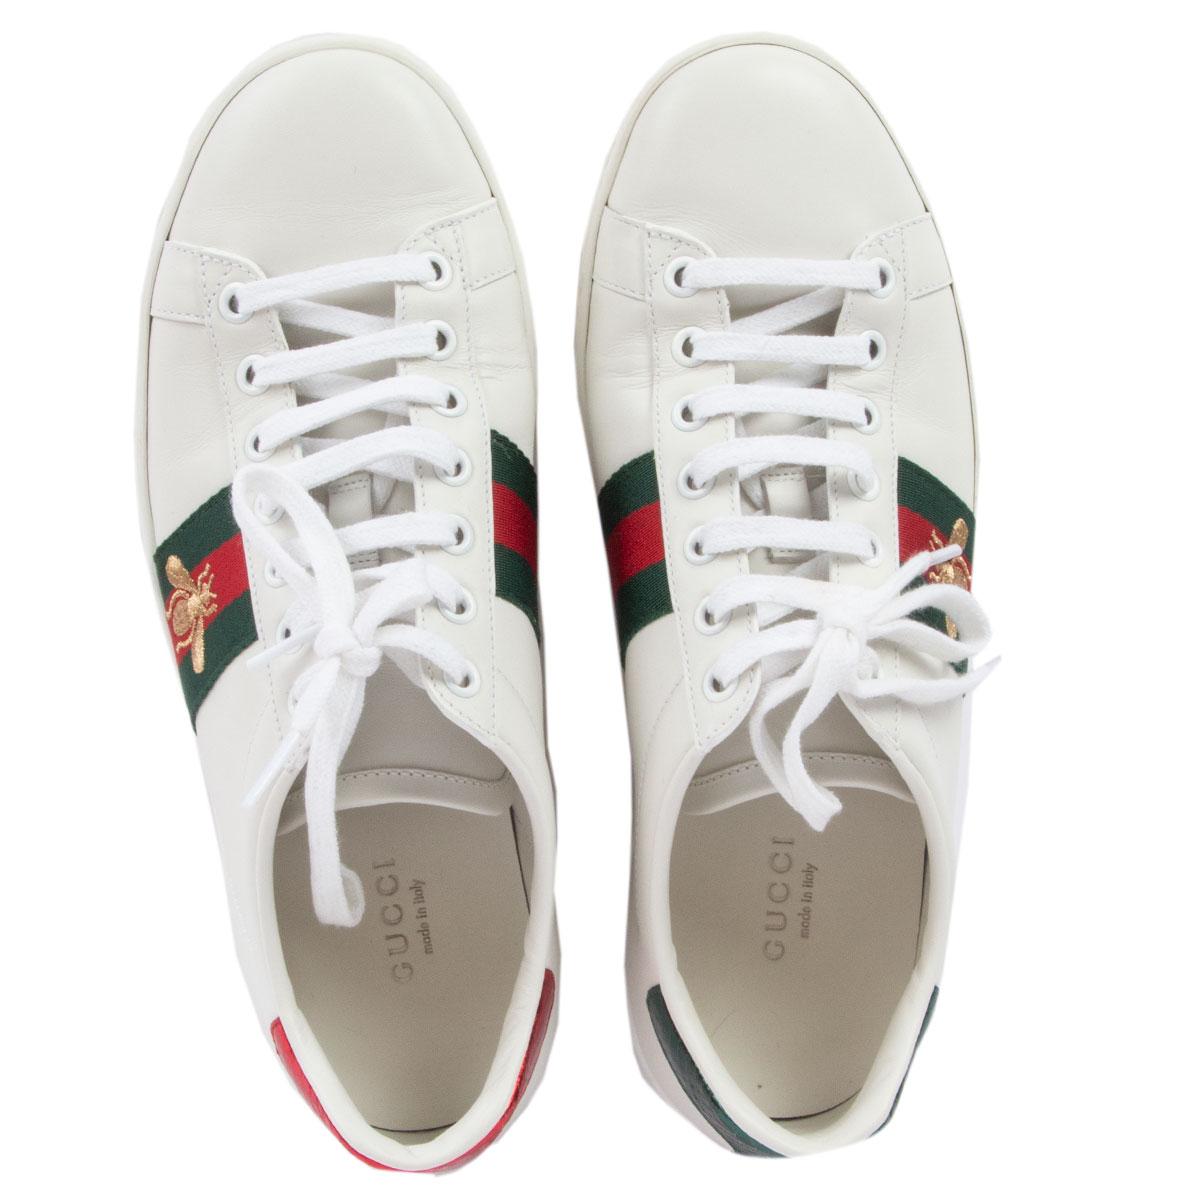 Women's GUCCI white leather ACE BEEN Sneakers Shoes 38